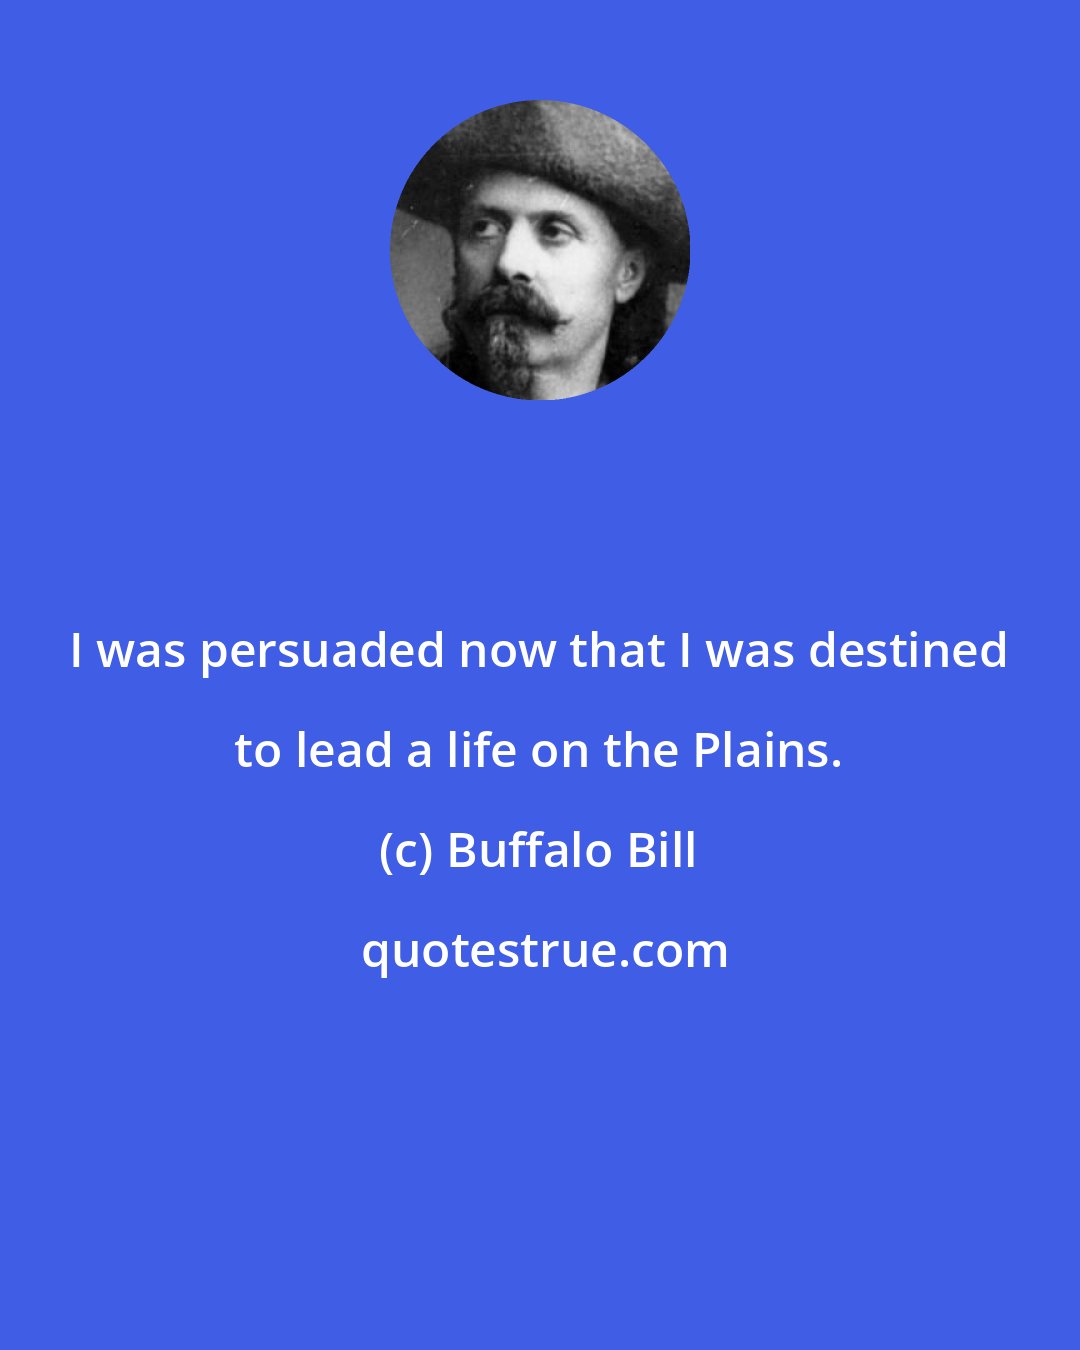 Buffalo Bill: I was persuaded now that I was destined to lead a life on the Plains.